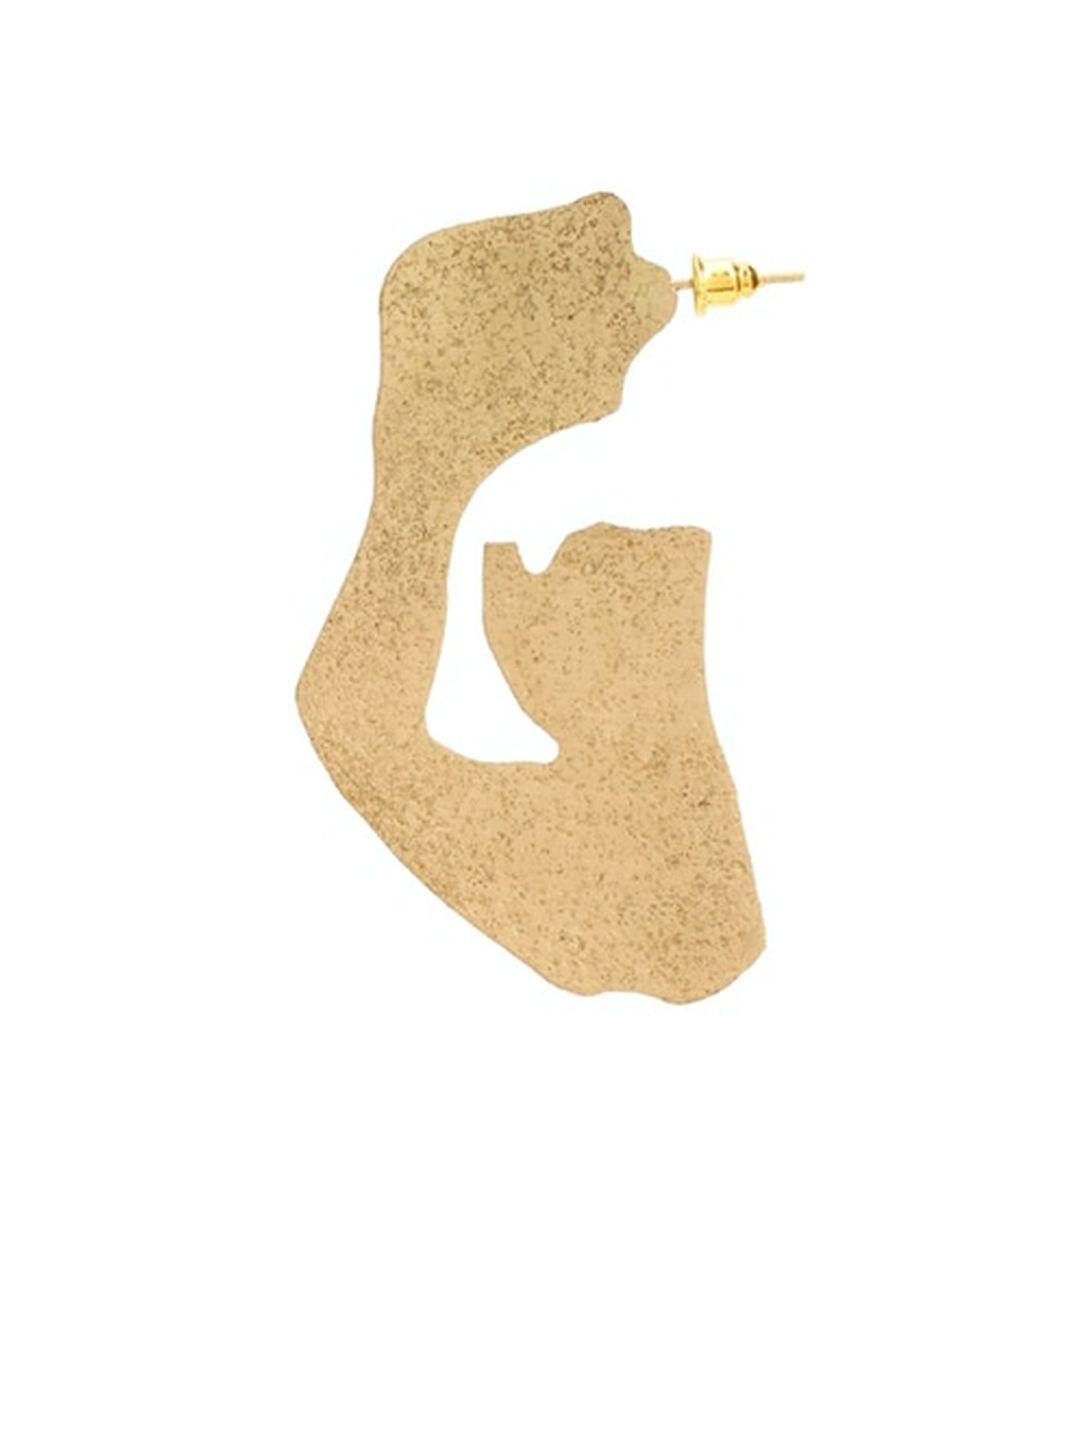 forever 21 gold-toned contemporary drop earrings